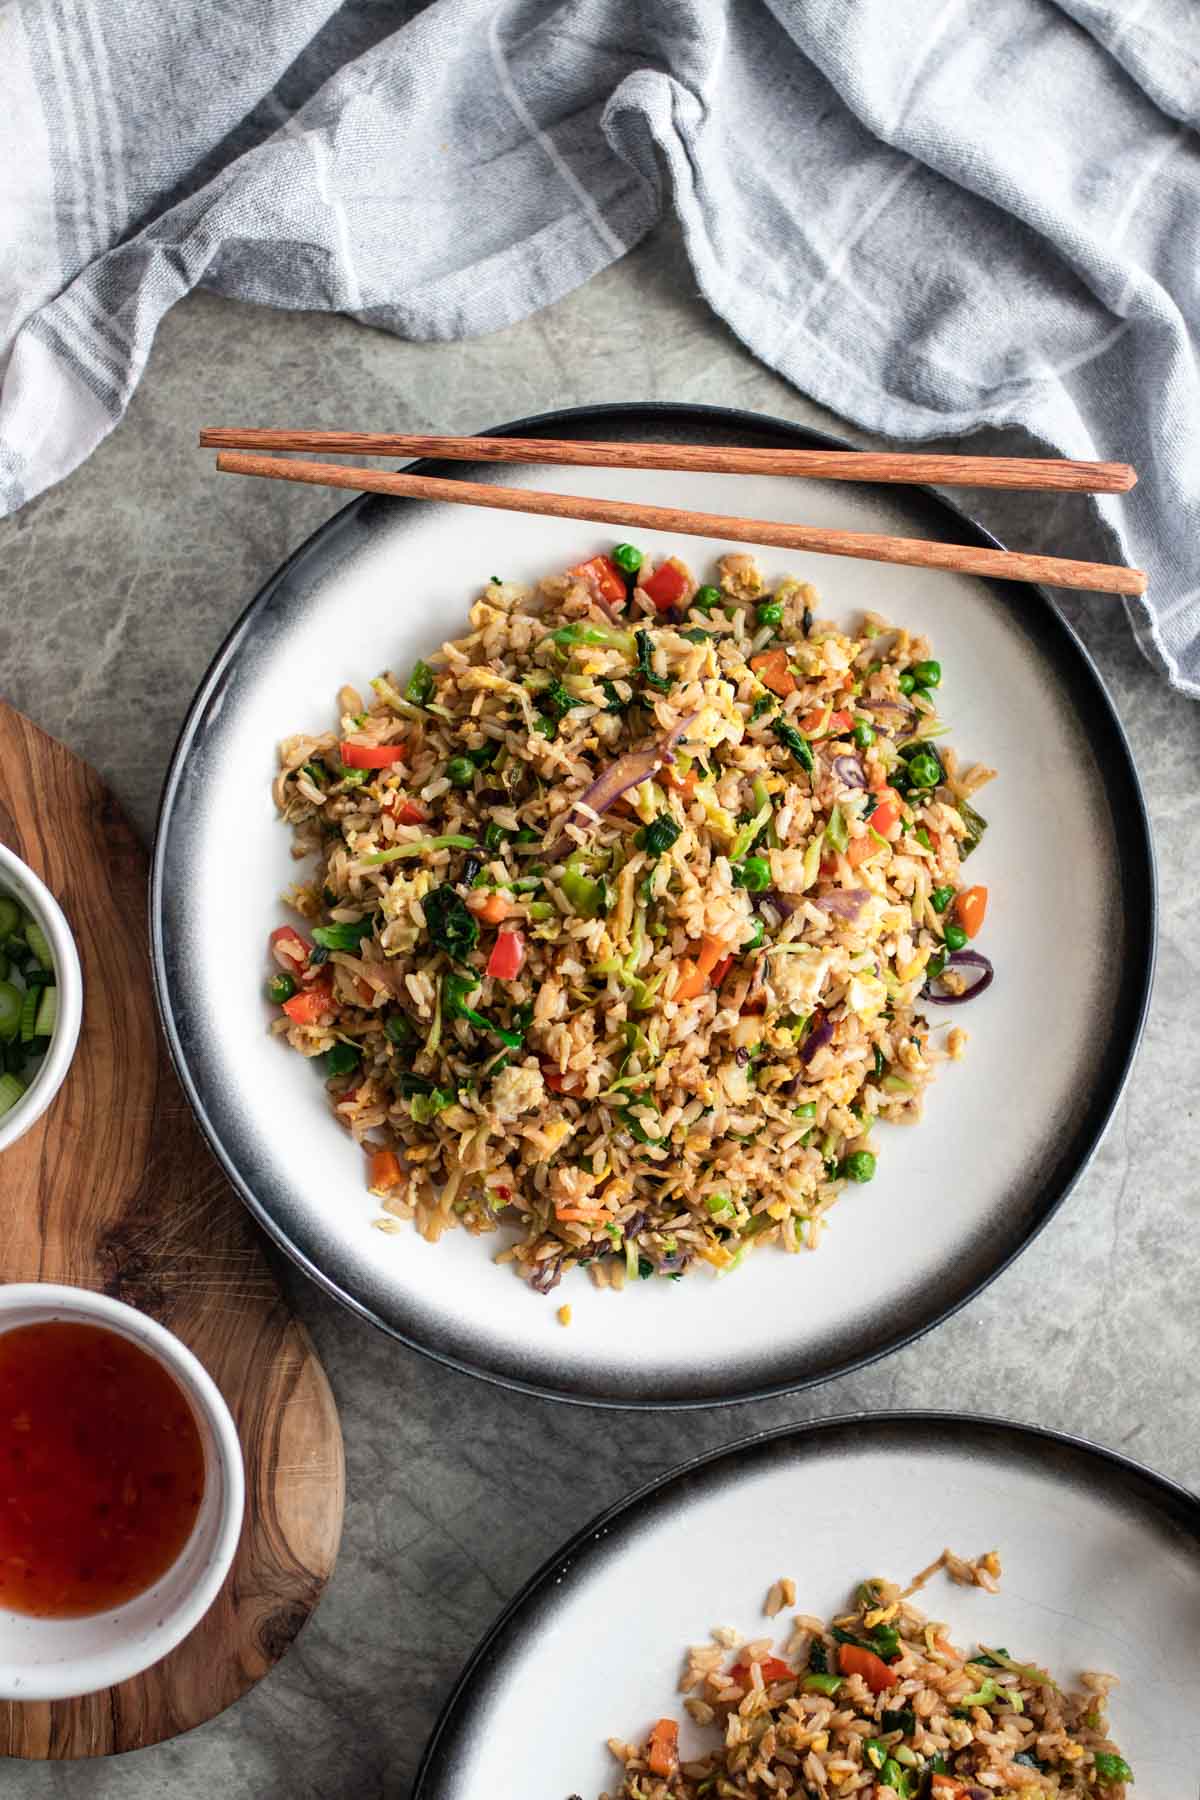 Two bowls of fried rice next to chopsticks and sweet chili sauce.